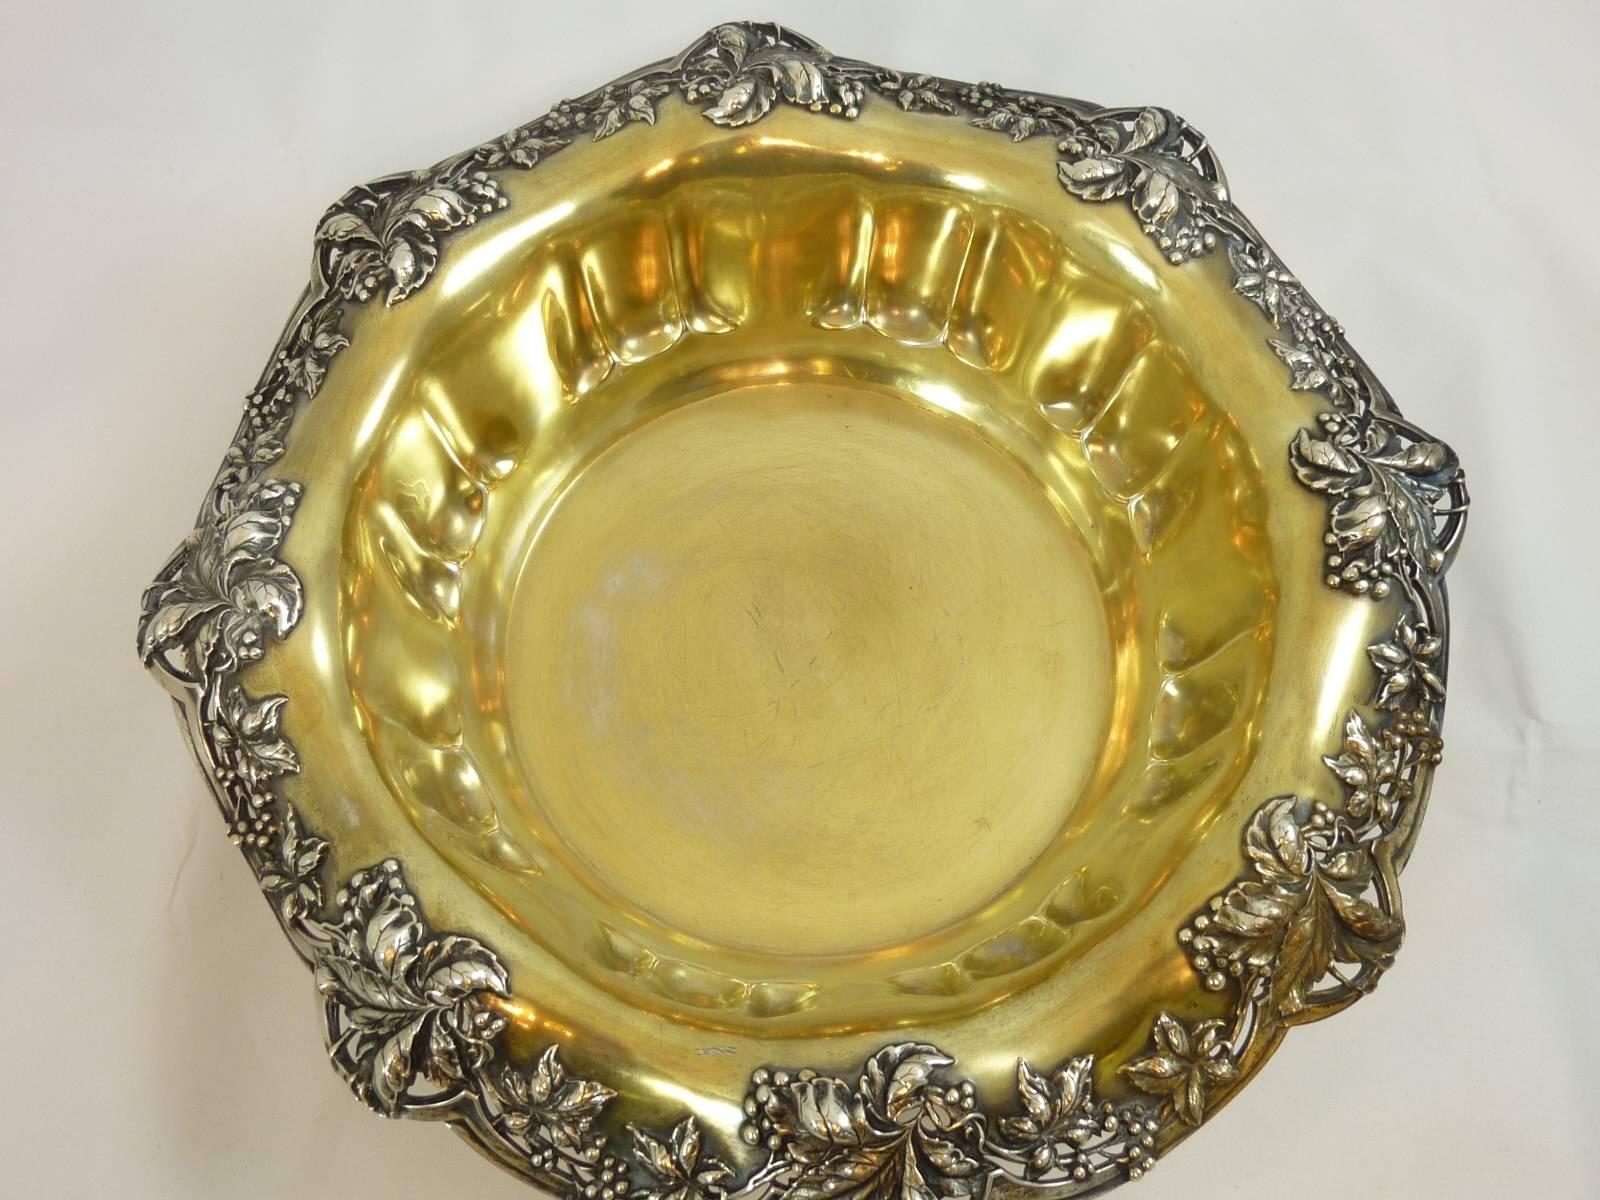 Being offered is a sterling silver bowl made by Tiffany & Co. of New York.